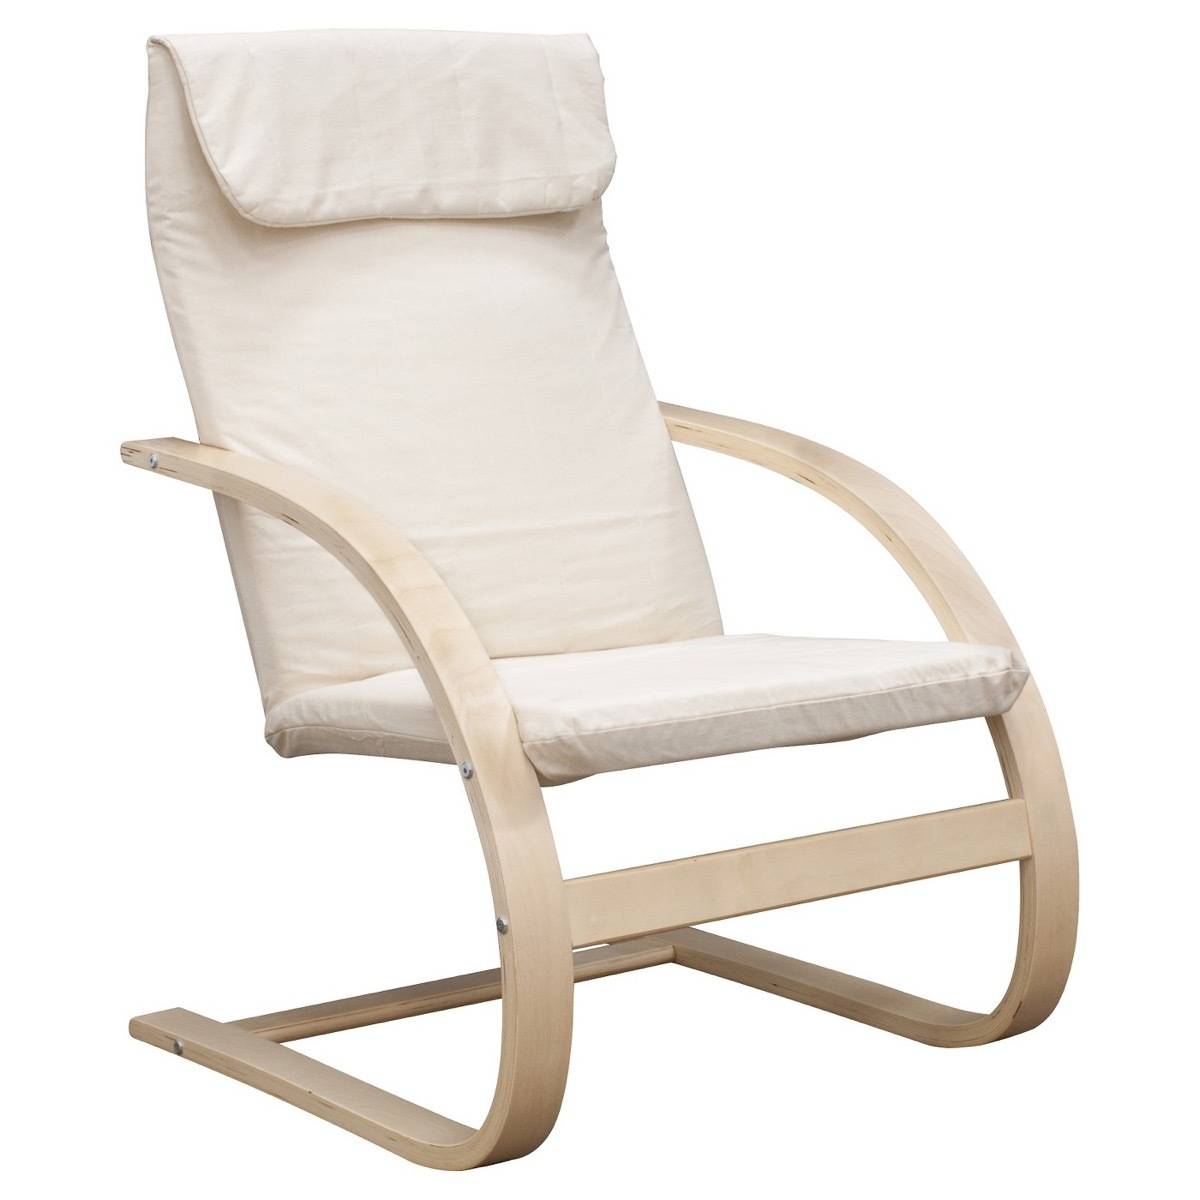 Bentwood lounge chair from Target